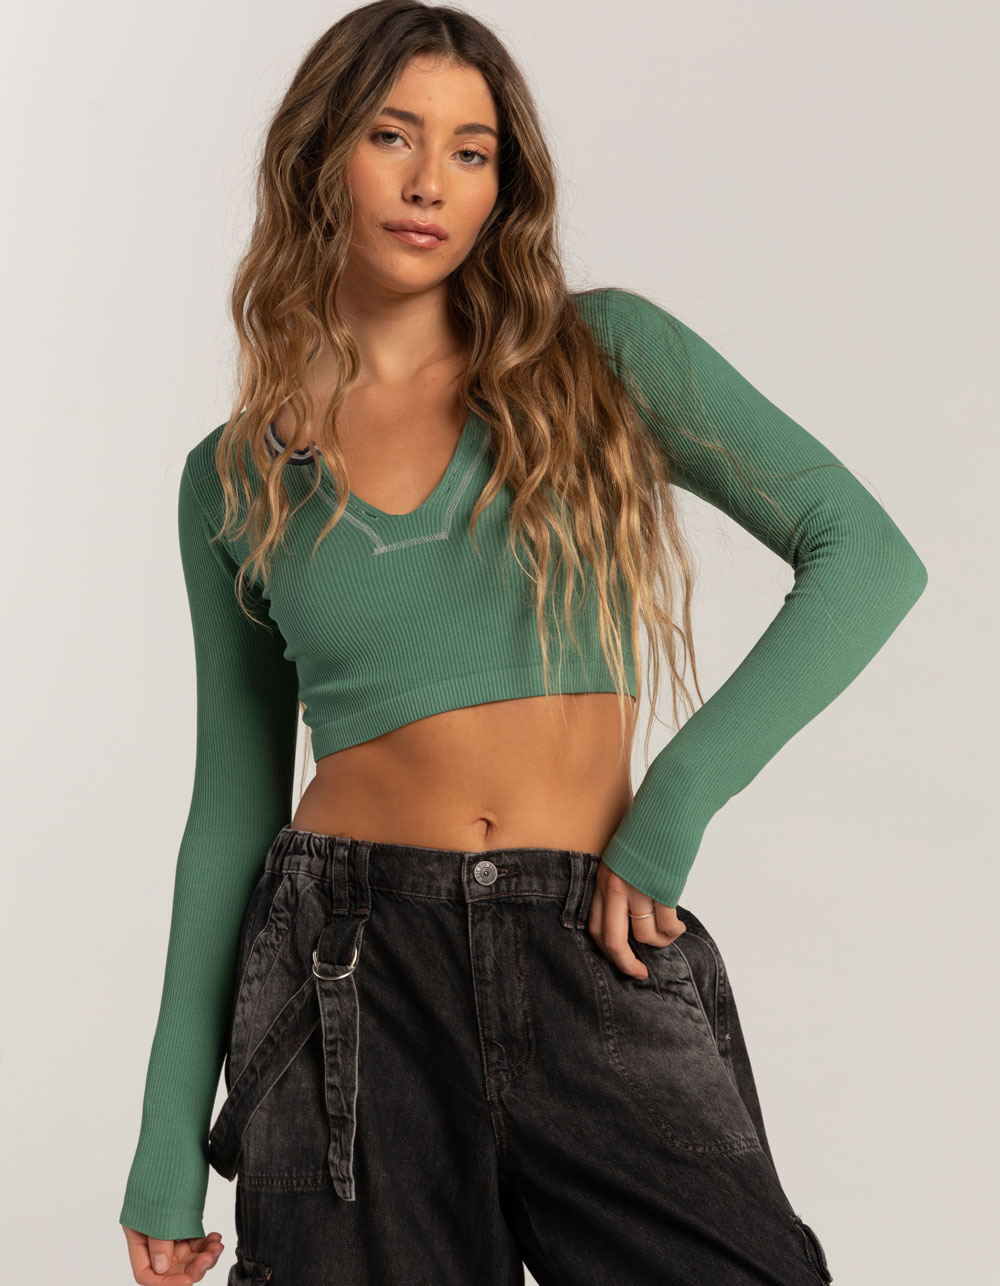 NEW Urban Outfitters Out From Under Go For Gold Seamless Top in Teal XS/